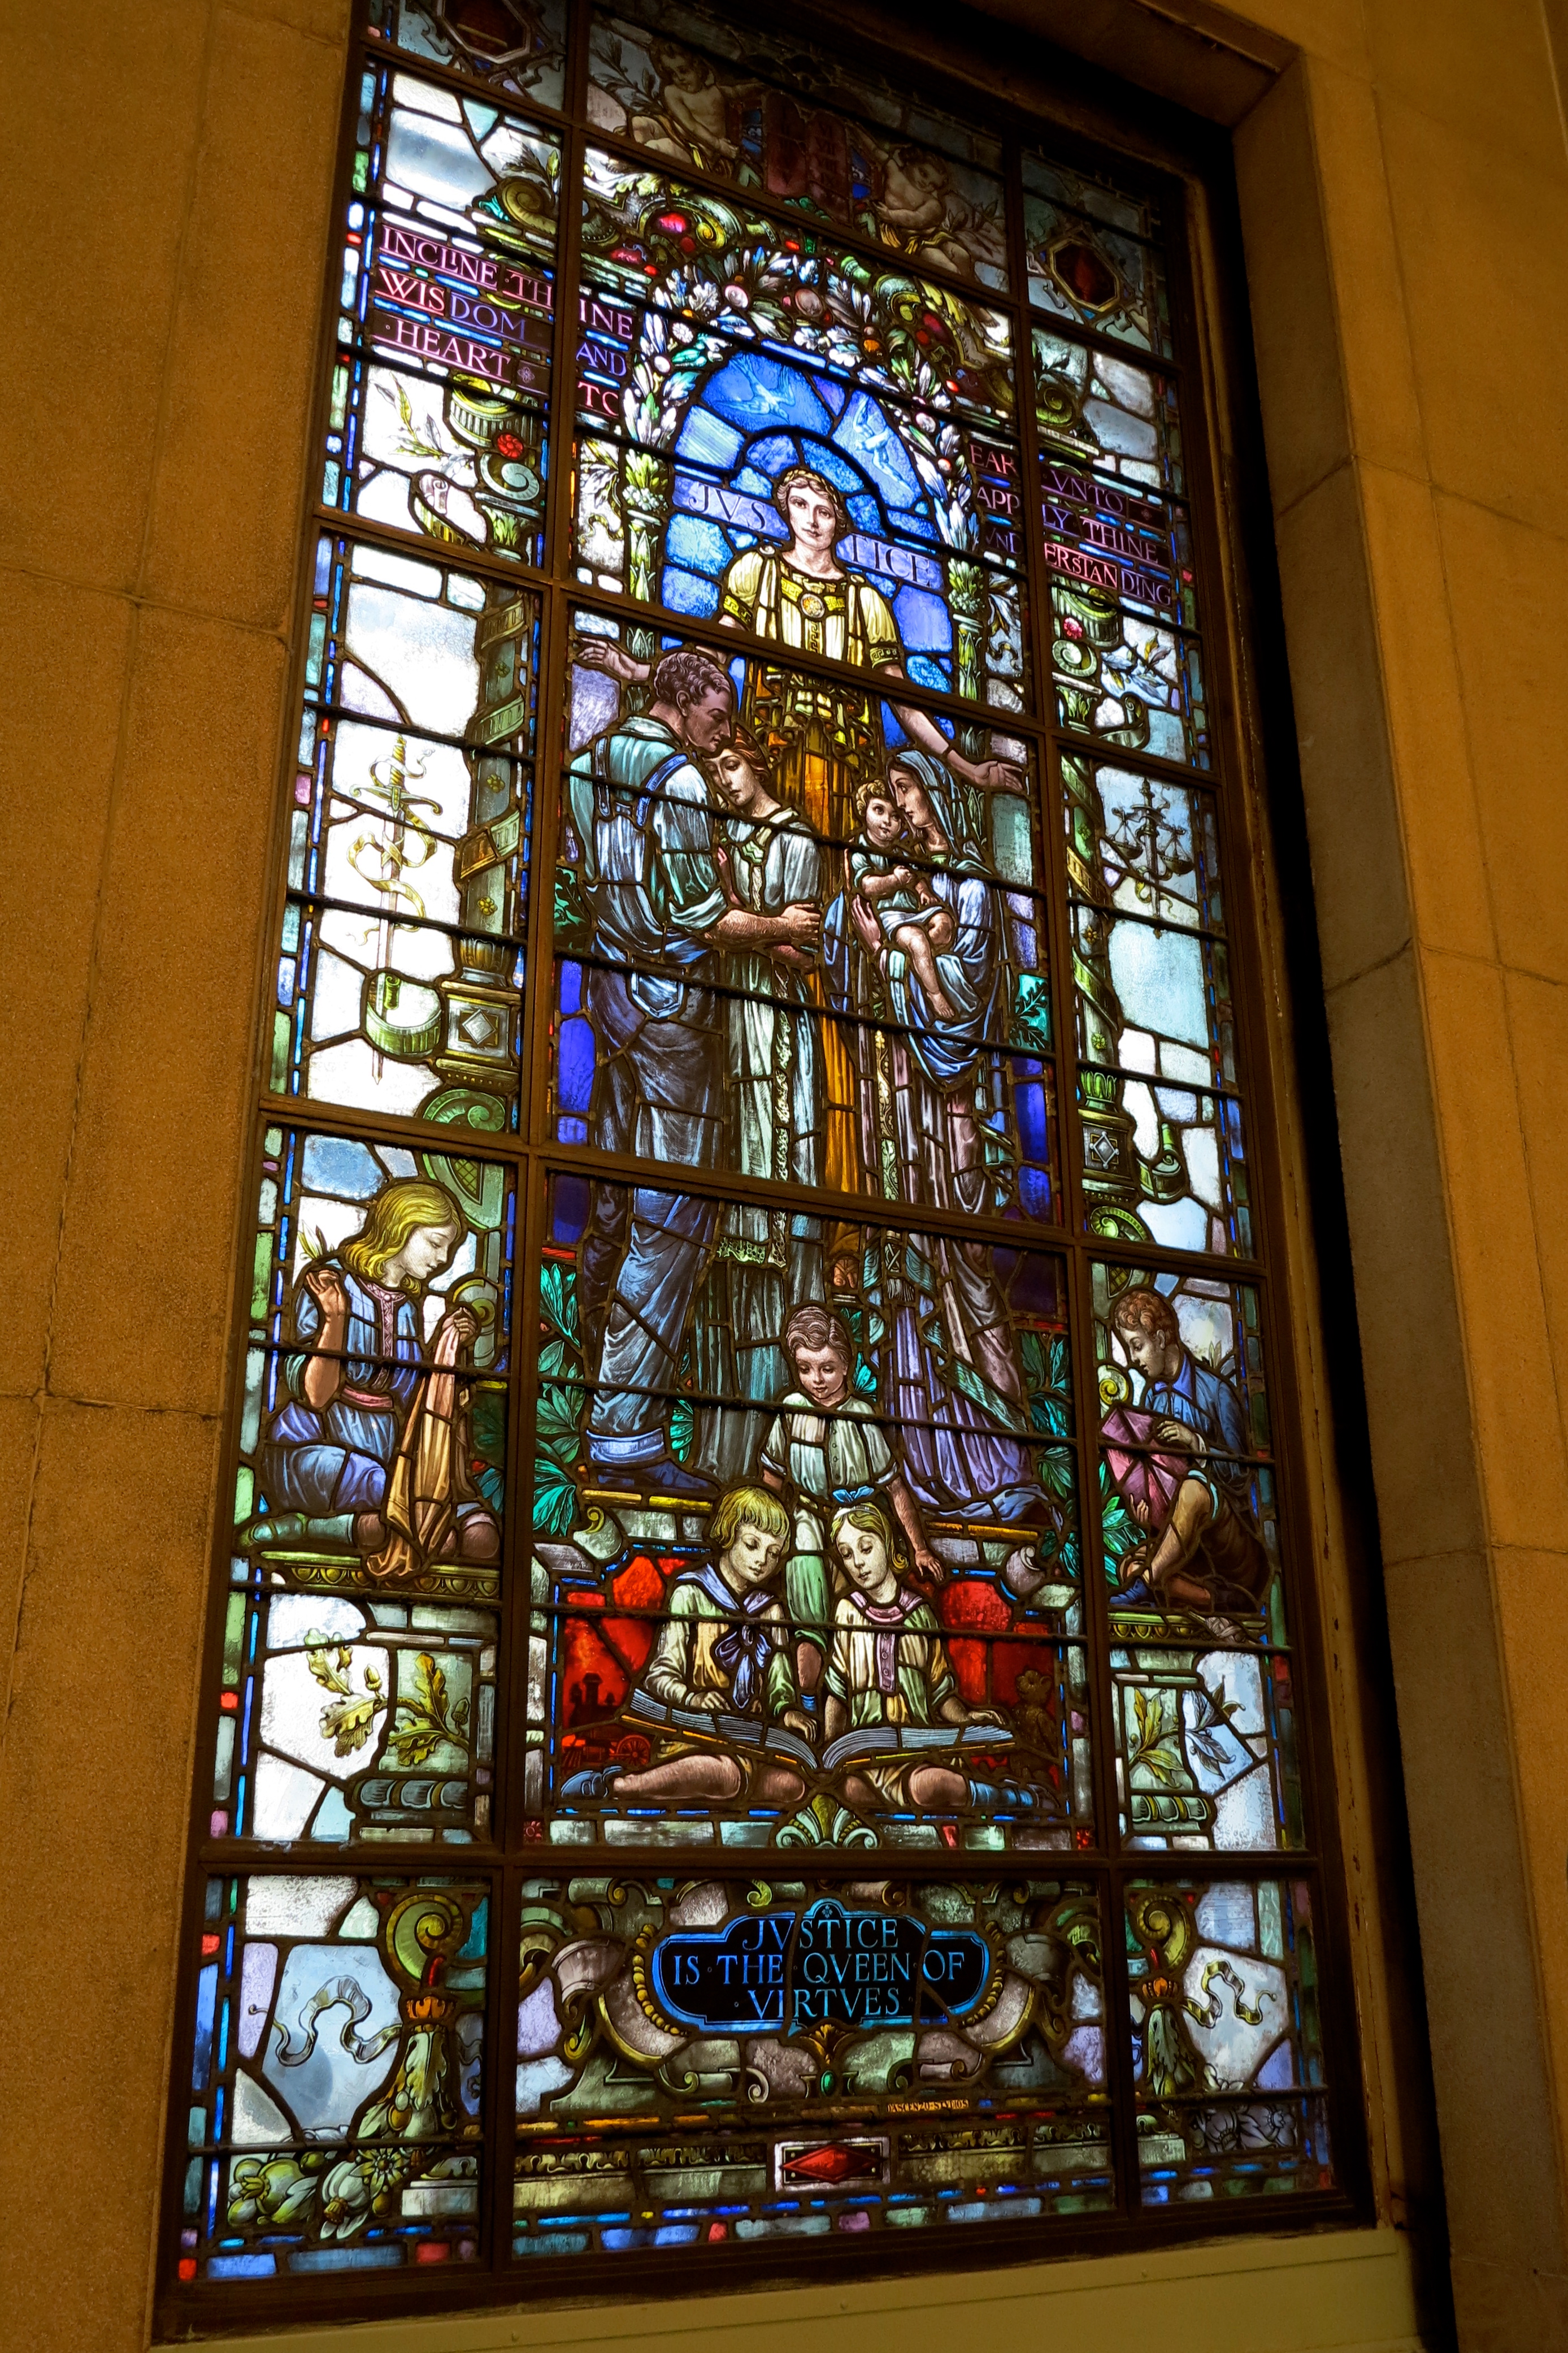 D'Acenzo Studios' Justice stained glass window, Family Court